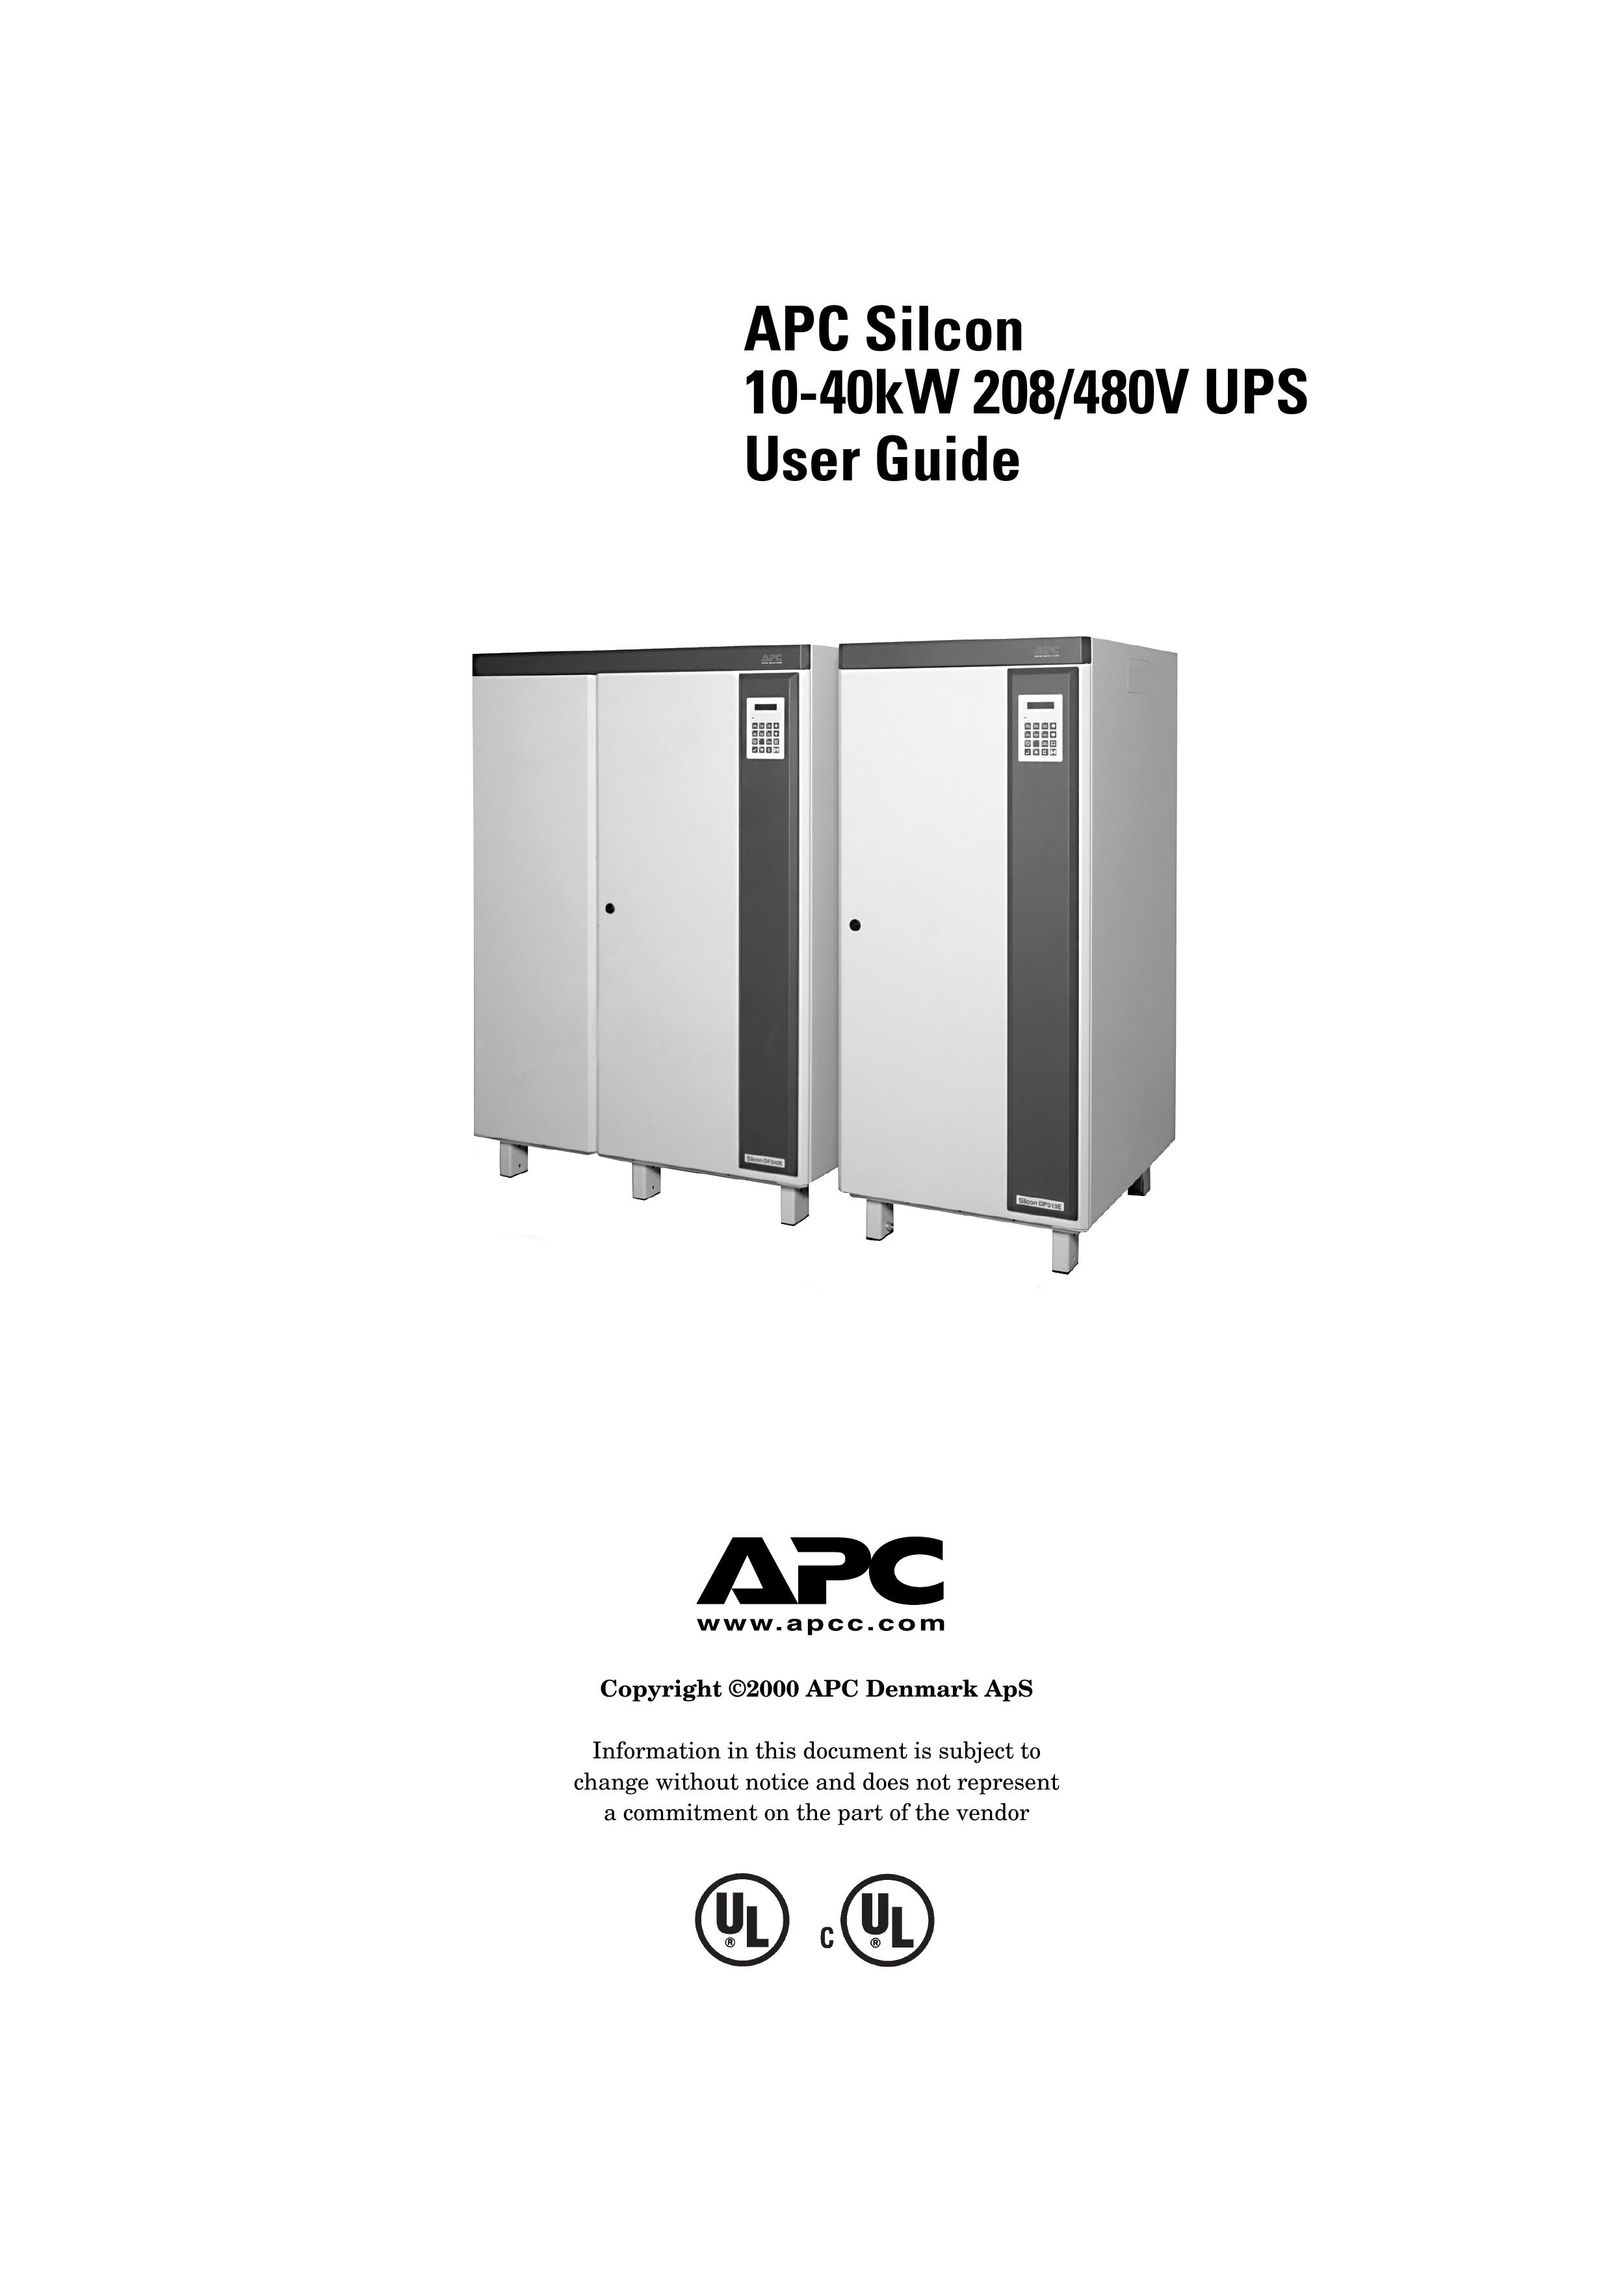 American Power Conversion 10-40kW 208/480V Power Supply User Manual